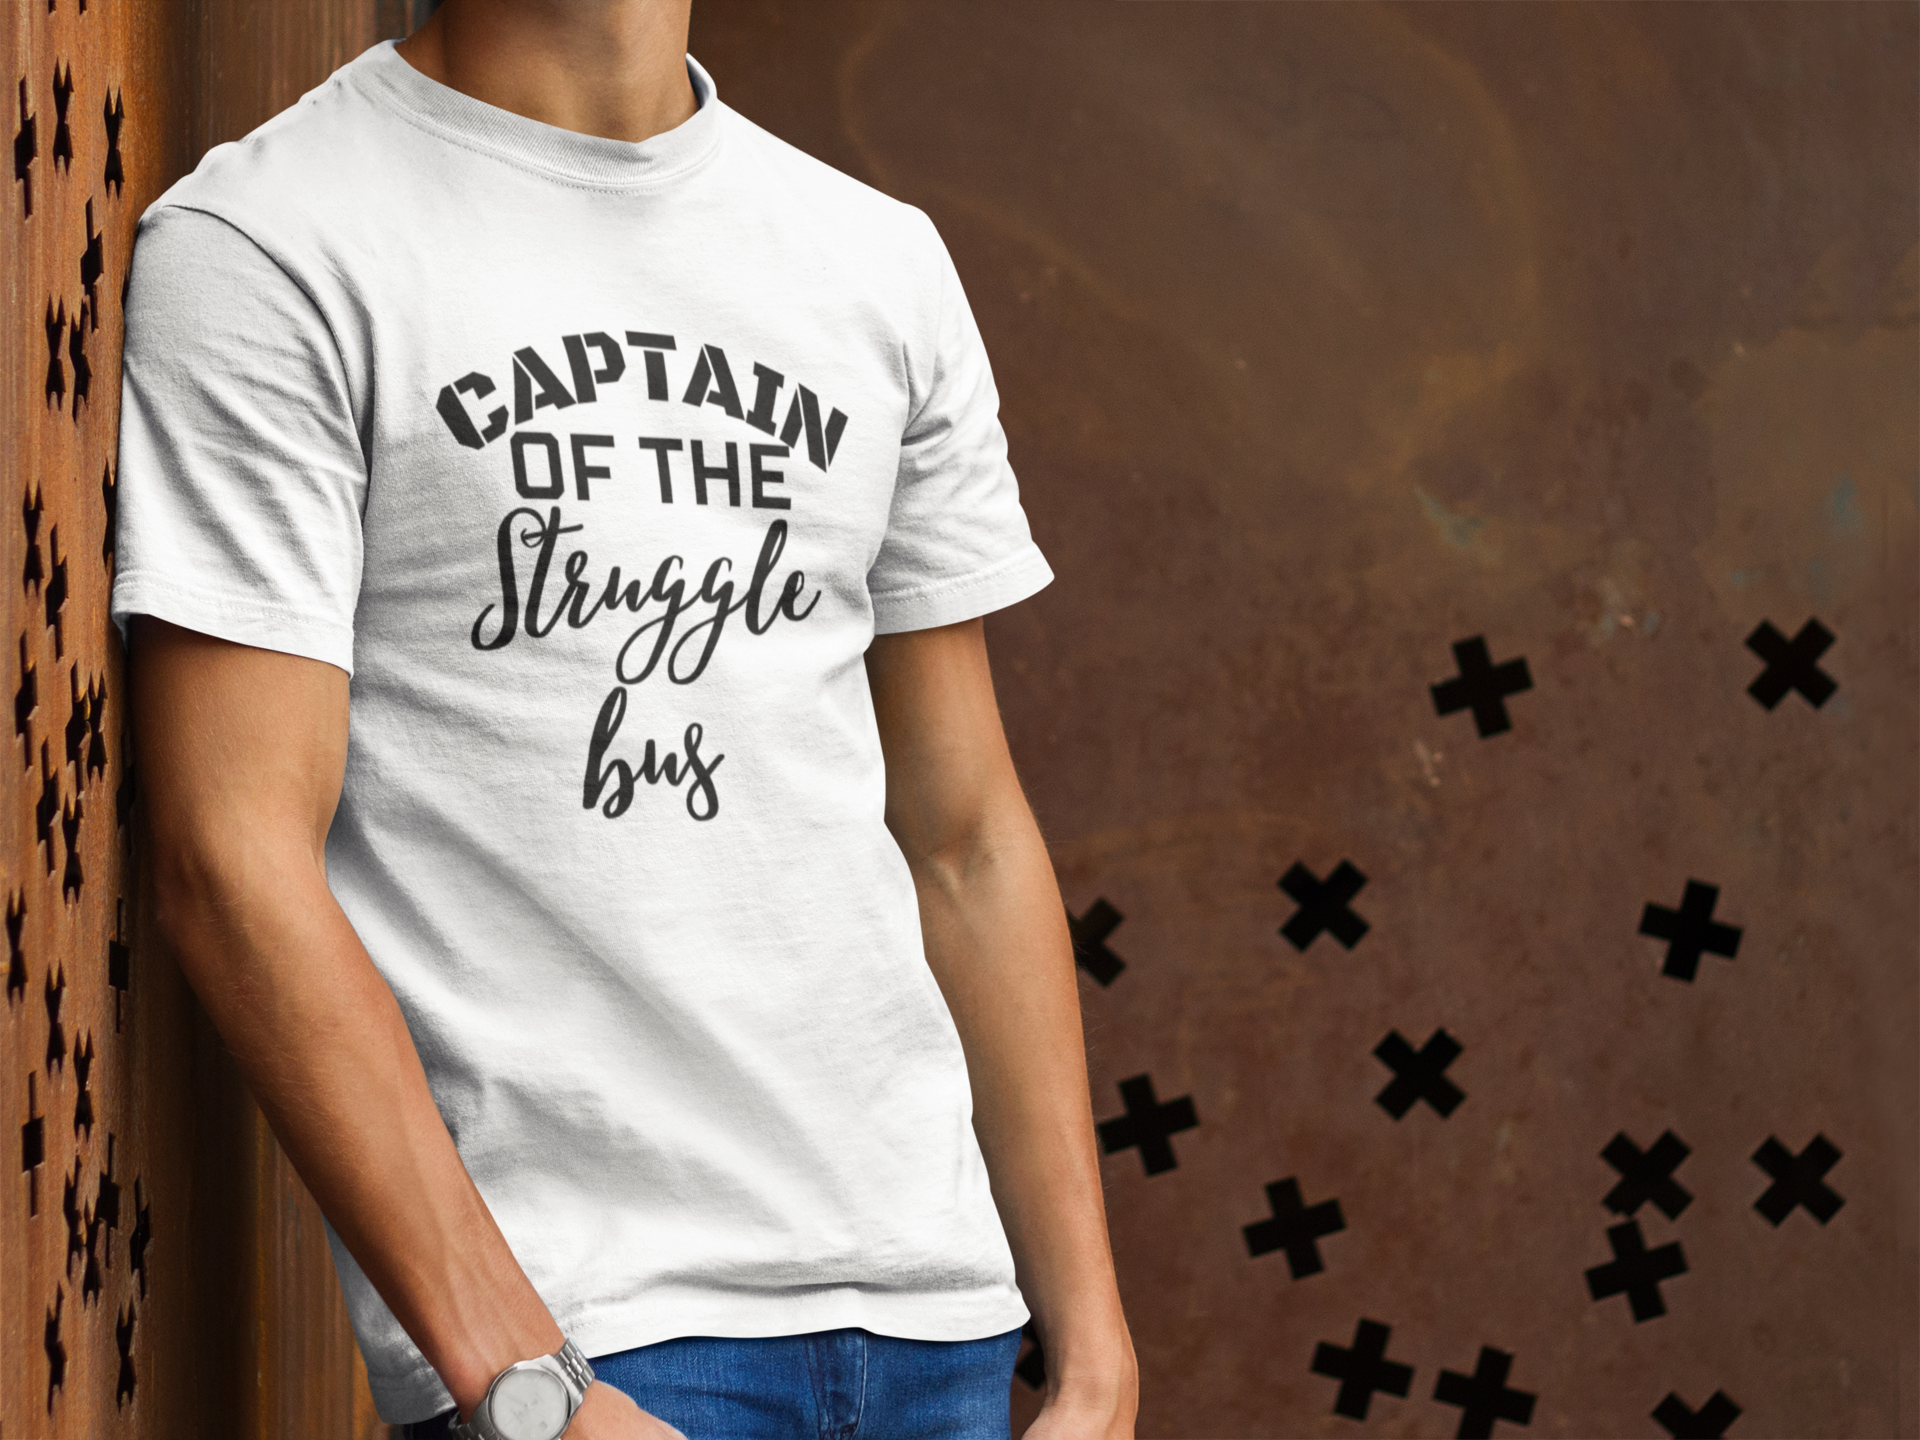 Captain of the Struggle Bus T-Shirt or Sweatshirt (Adult)